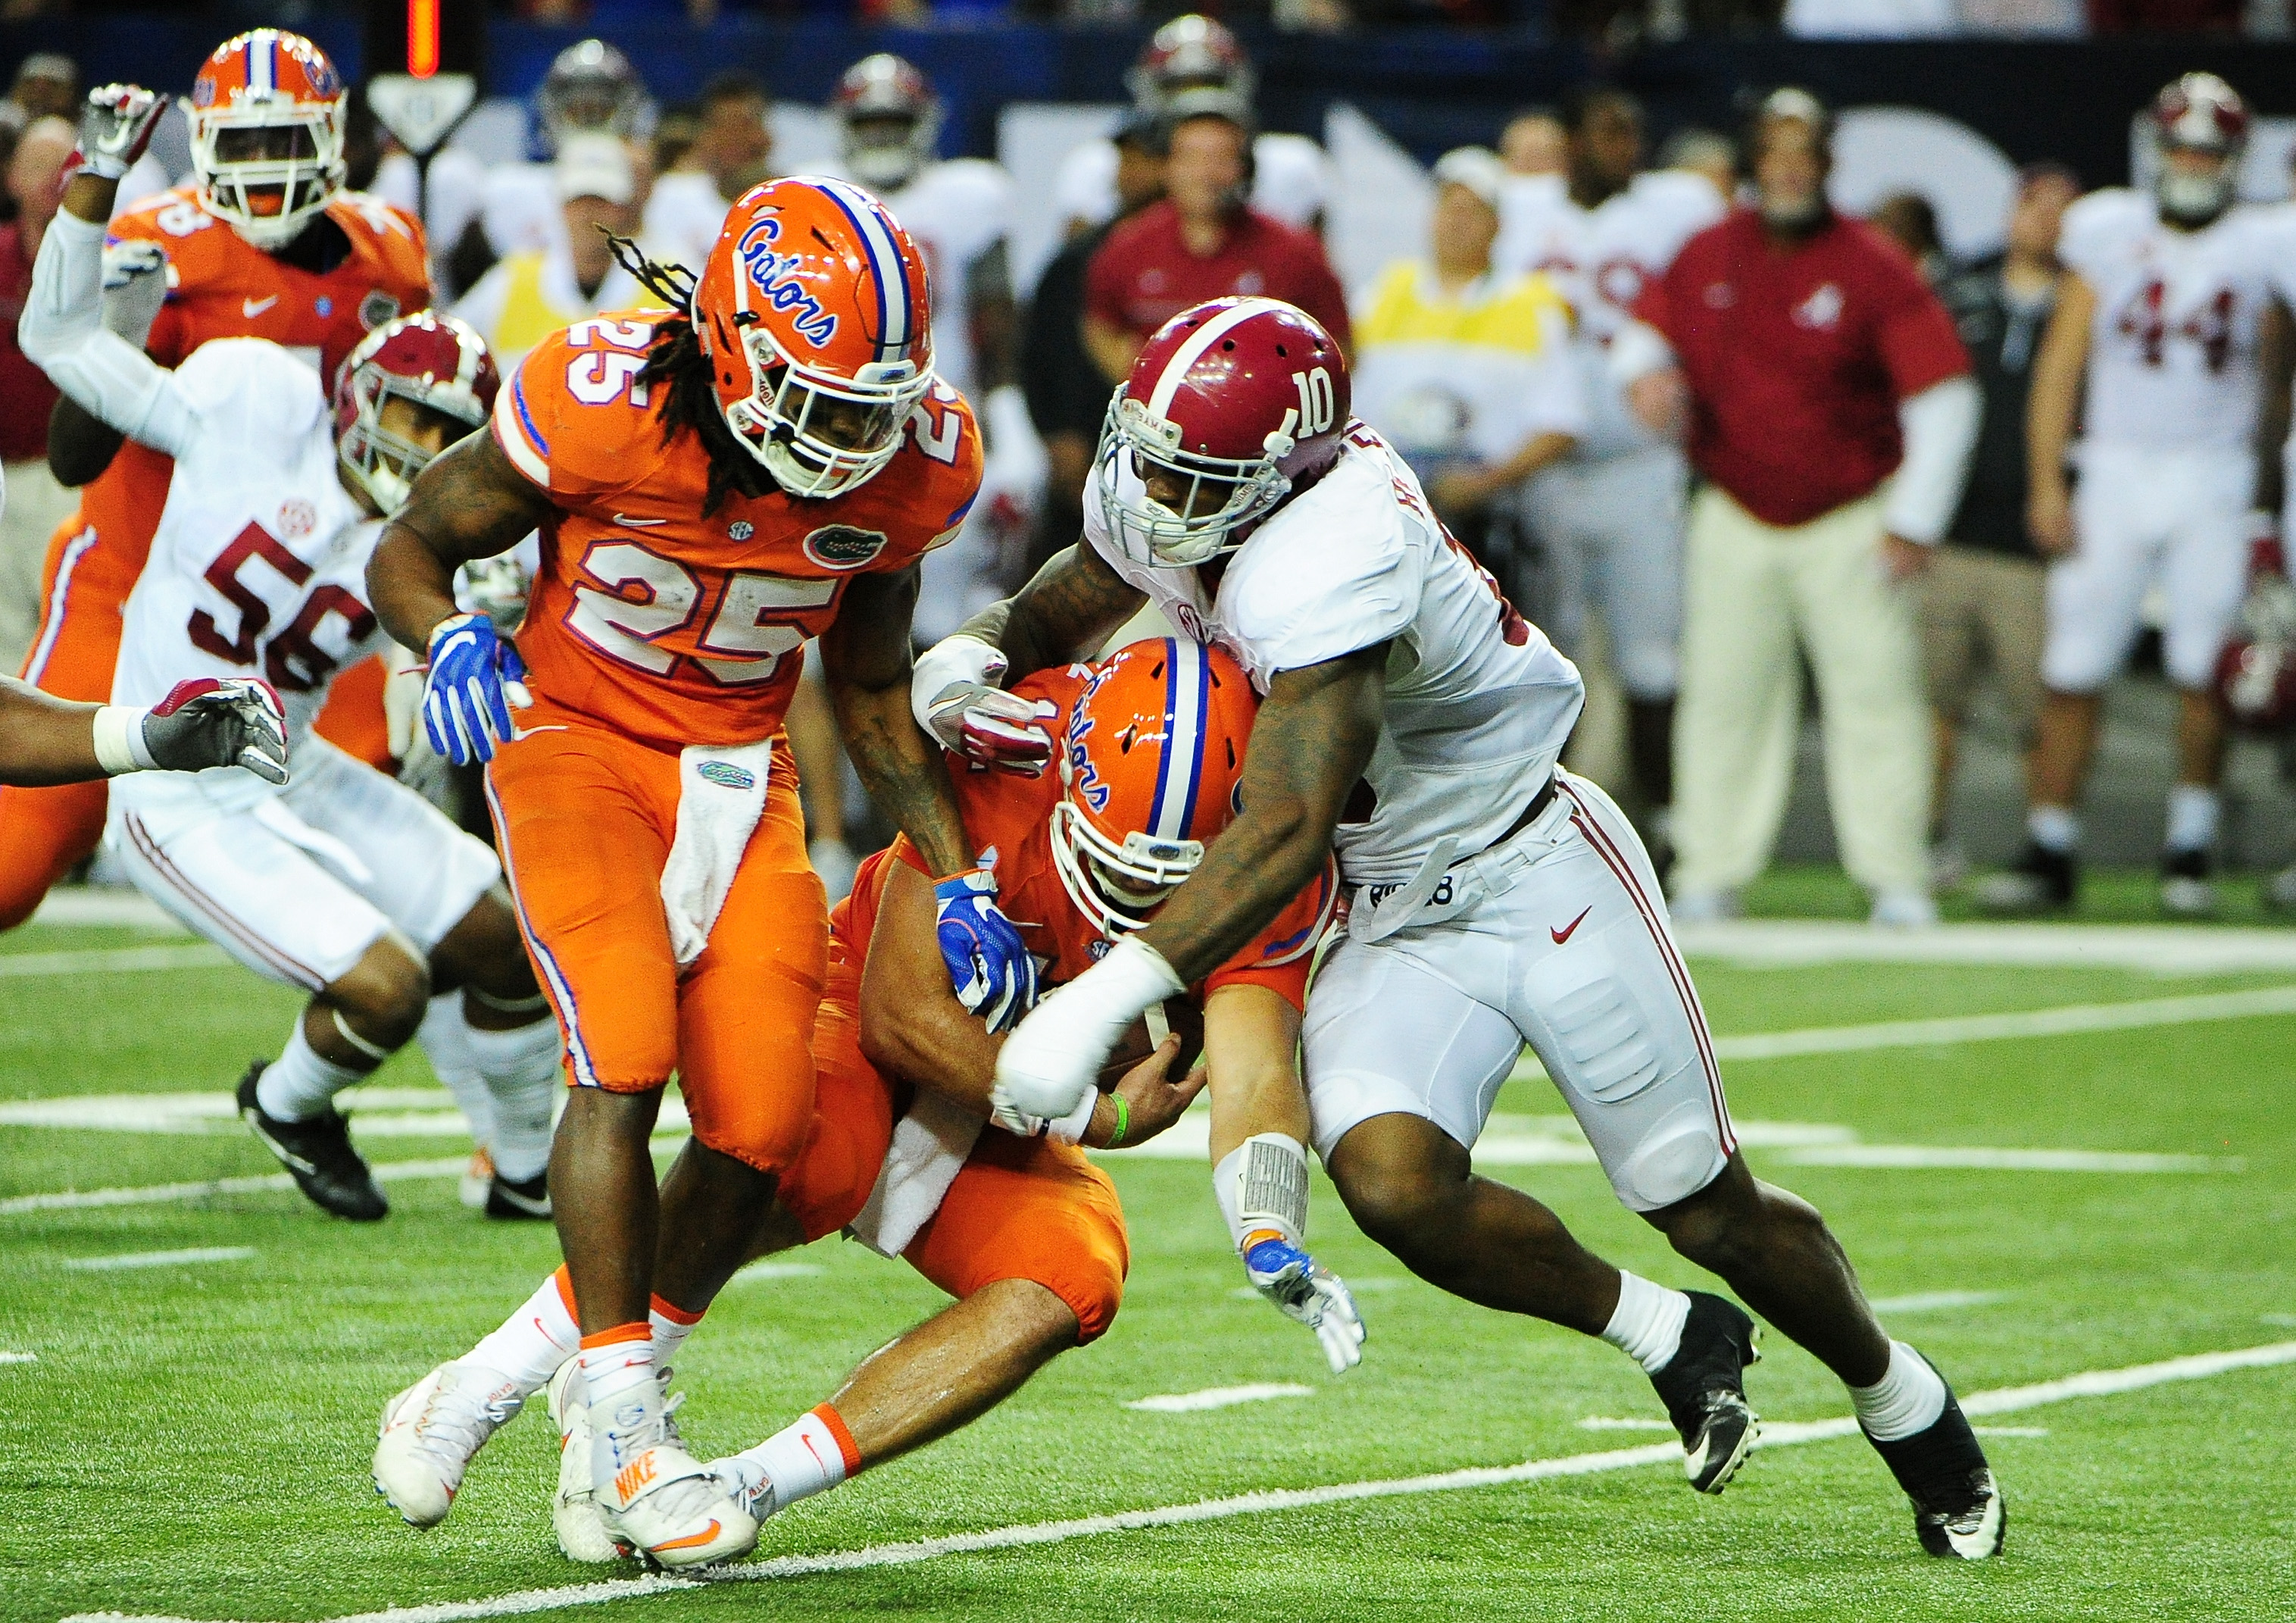 Austin Appleby #12 of the Florida Gators is sacked by game MVP Reuben Foster #10 of the Alabama Crimson Tide in the first quarter during the SEC Championship game. (Photo by Scott Cunningham/Getty Images)